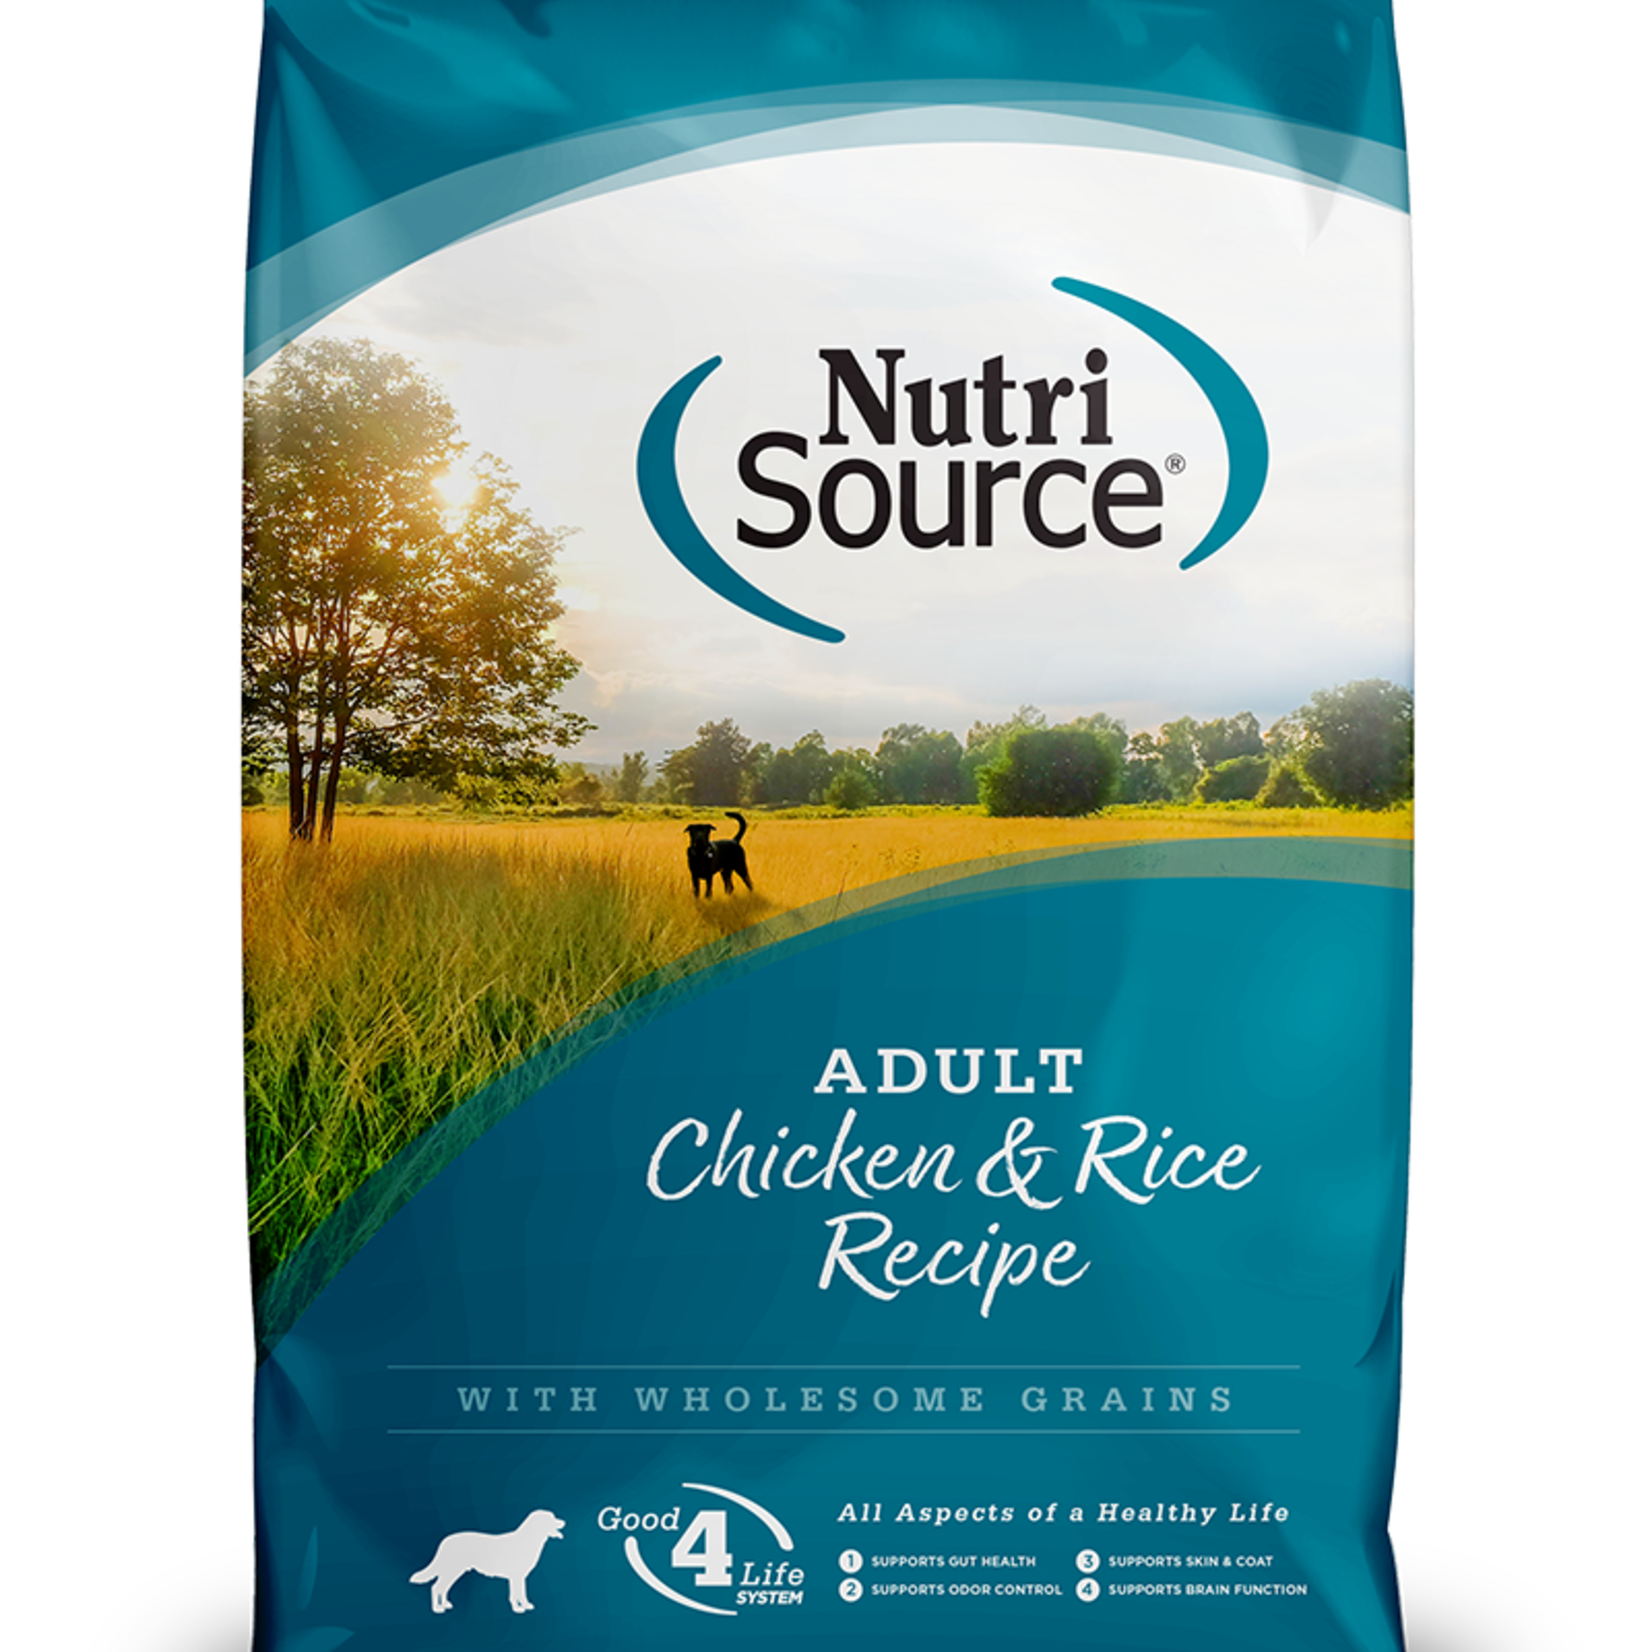 Nutri Source NutriSource Adult Chicken & Rice